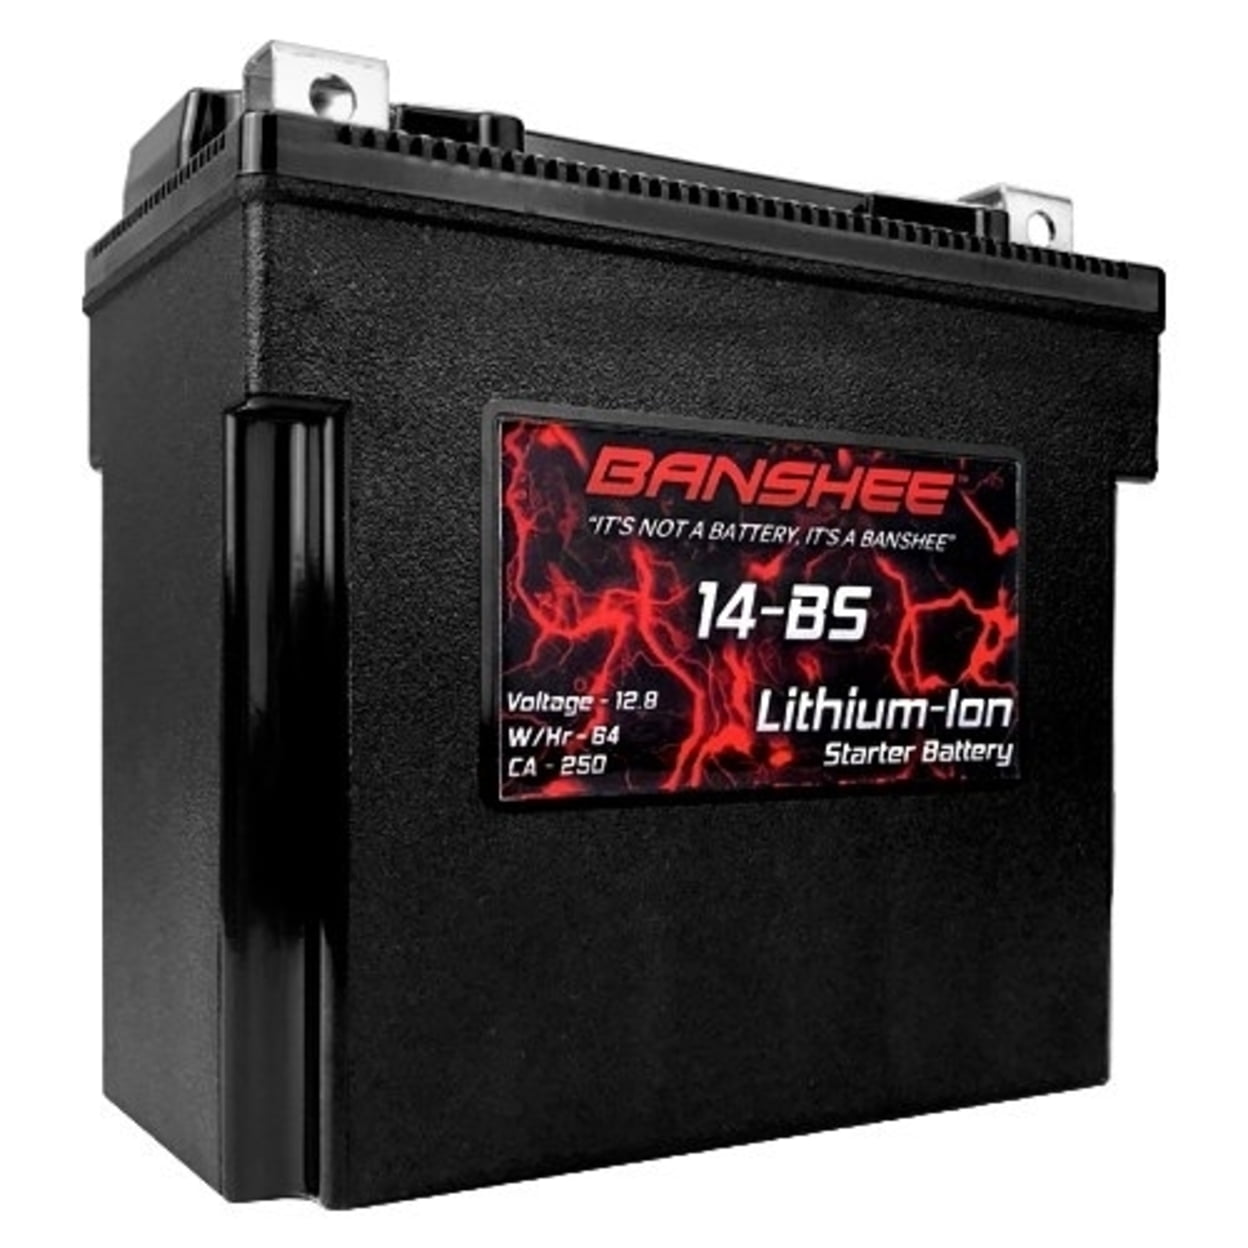 Picture of Banshee DLFP14-BS-04 12.8V Lithium Ion Battery for Replacement Yuasa YTX14-BS Lightweight Motorsport Motorcycle